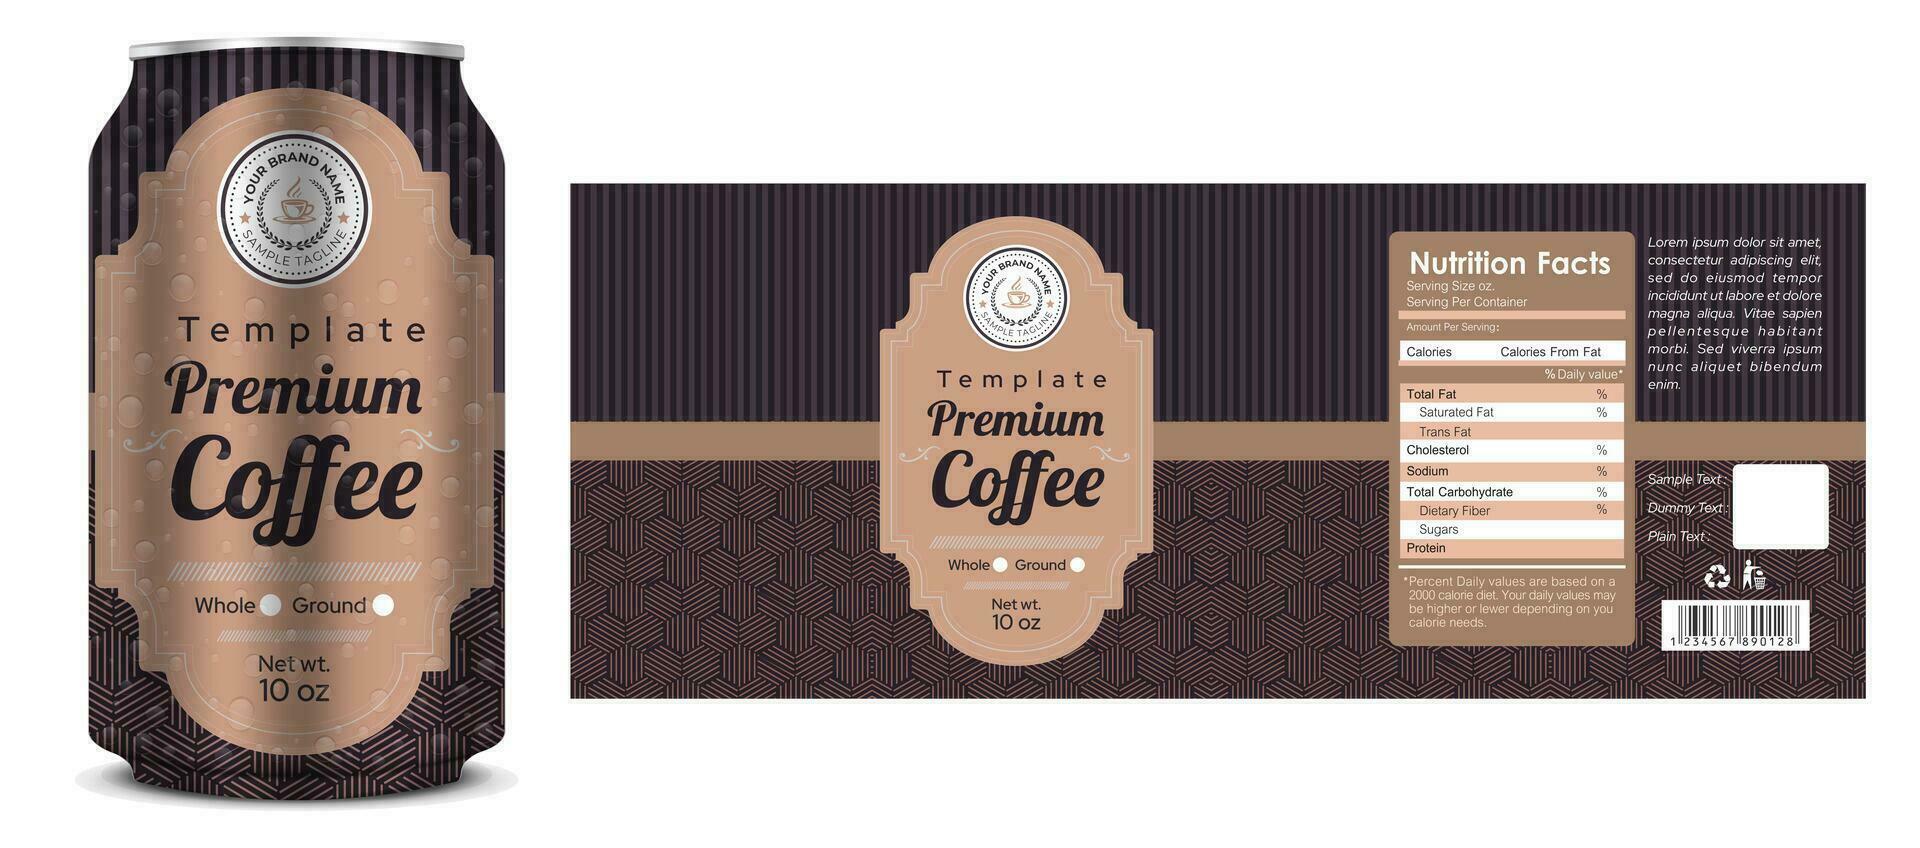 Coffee can label design, roasted coffee drink packaging design, latte espresso cappuccino brown label template illustration, cold coffee drink editable vector file